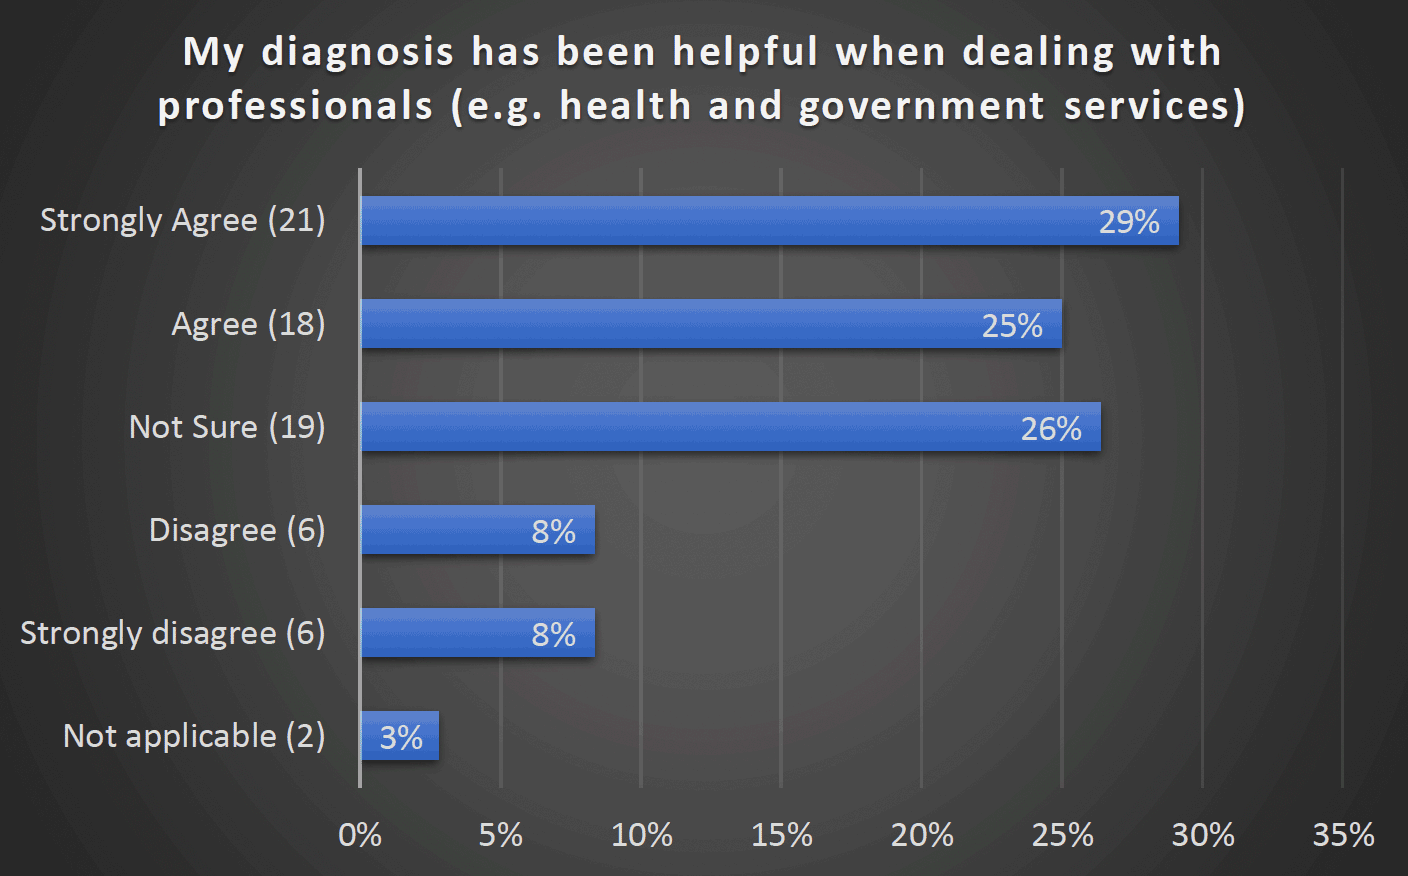 My diagnosis has been helpful when dealing with professionals (e.g. health and government services) - Strongly Agree (21) 29%, Agree (18) 25%, Not Sure (19) 26%, Disagree (6) 8%, Strongly disagree (6) 8%, Not applicable (2) 3%